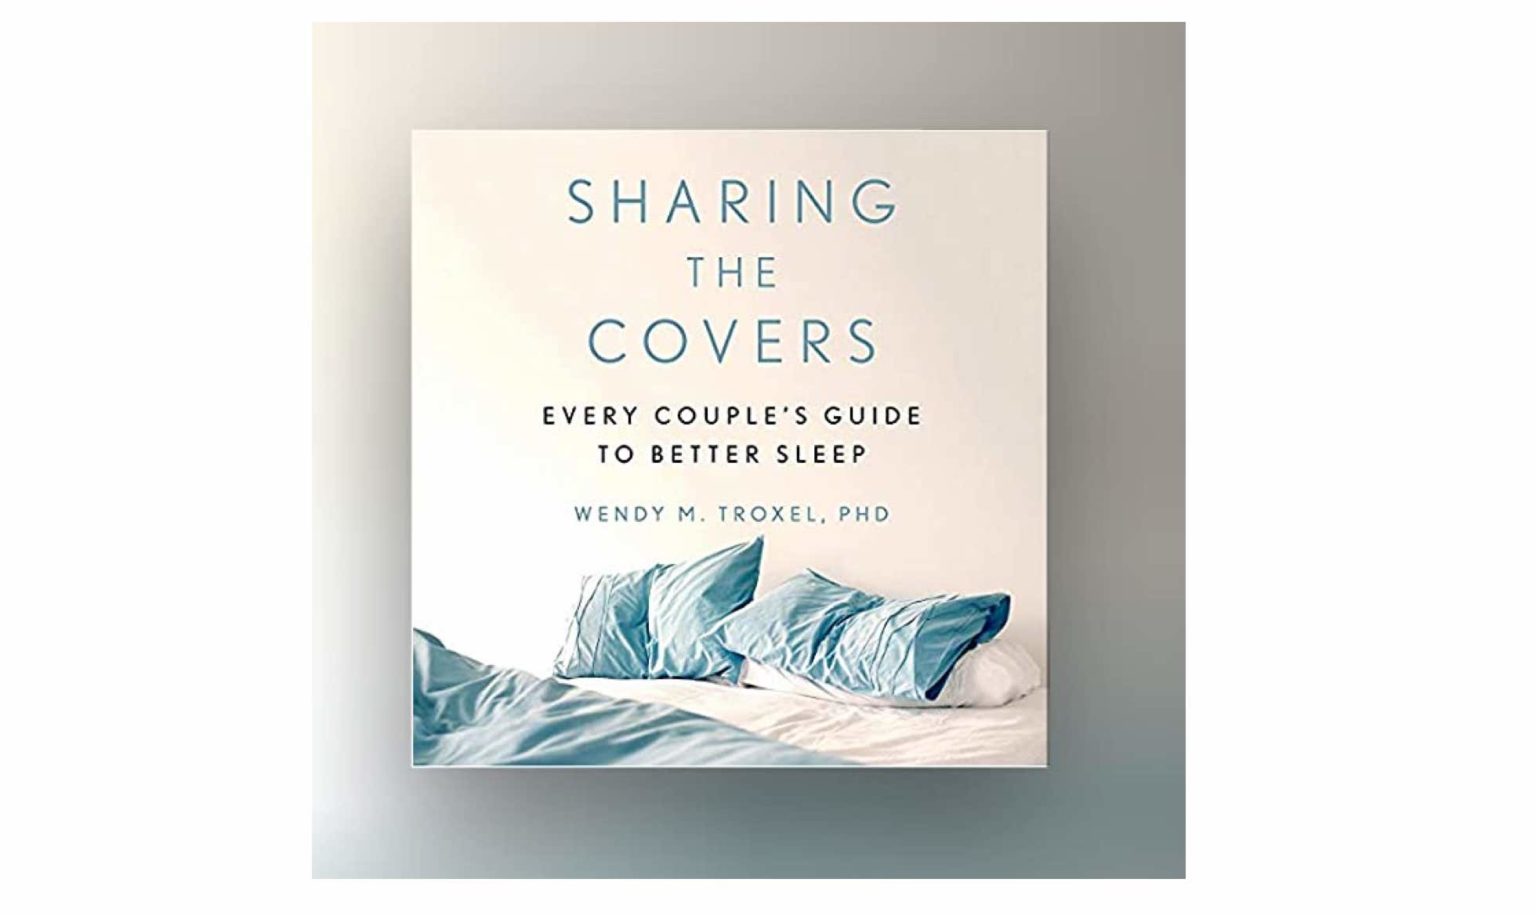 Sharing the Covers: Every Couple’s Guide to Better Sleep